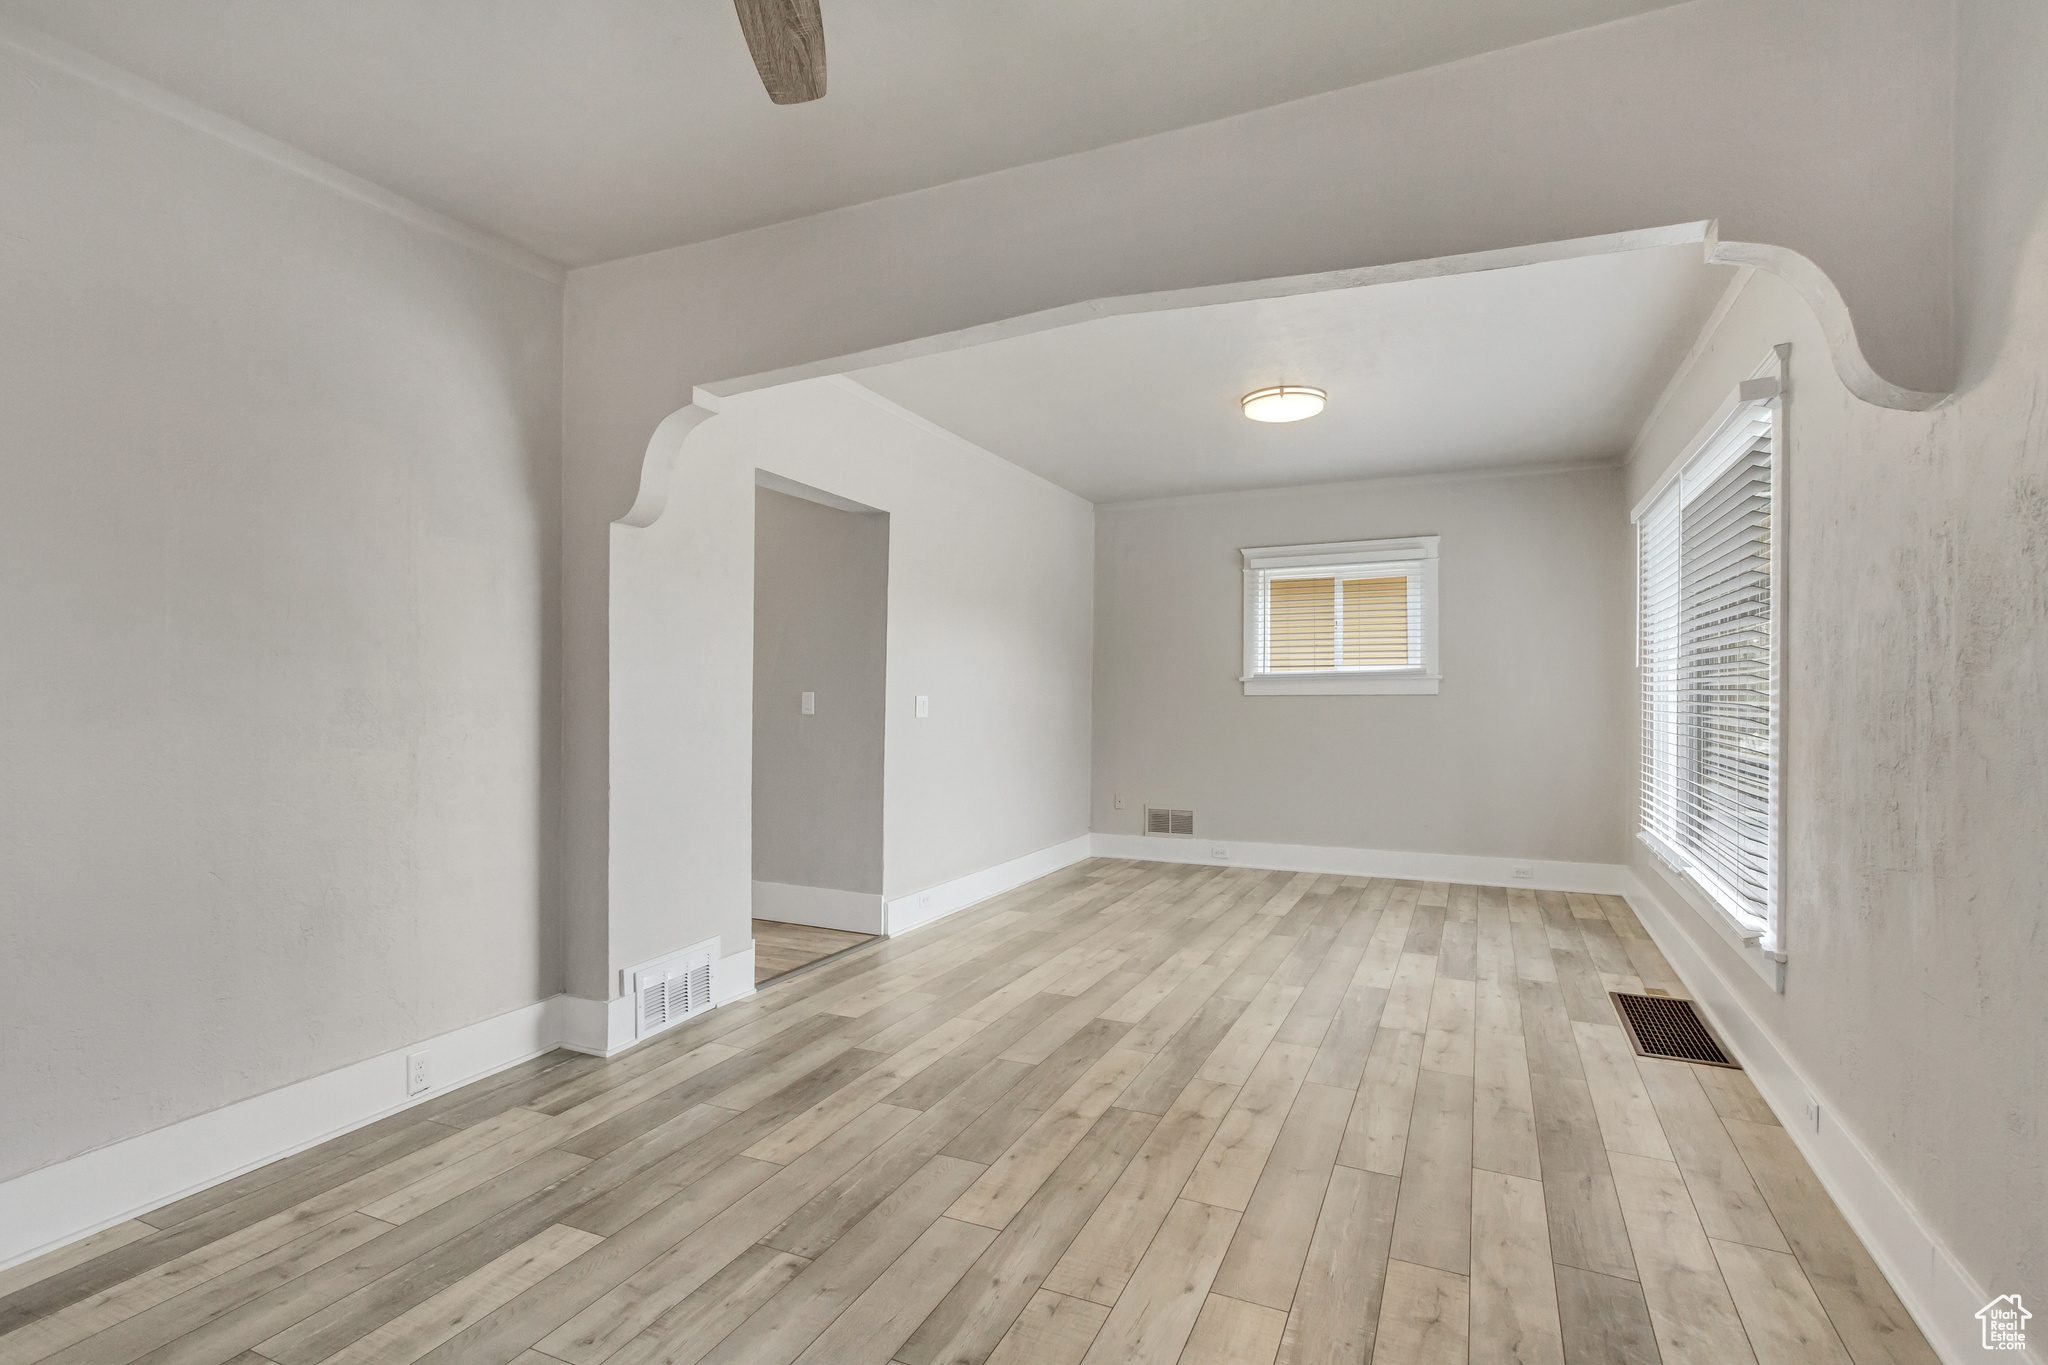 Unfurnished room with light hardwood / wood-style flooring and ceiling fan